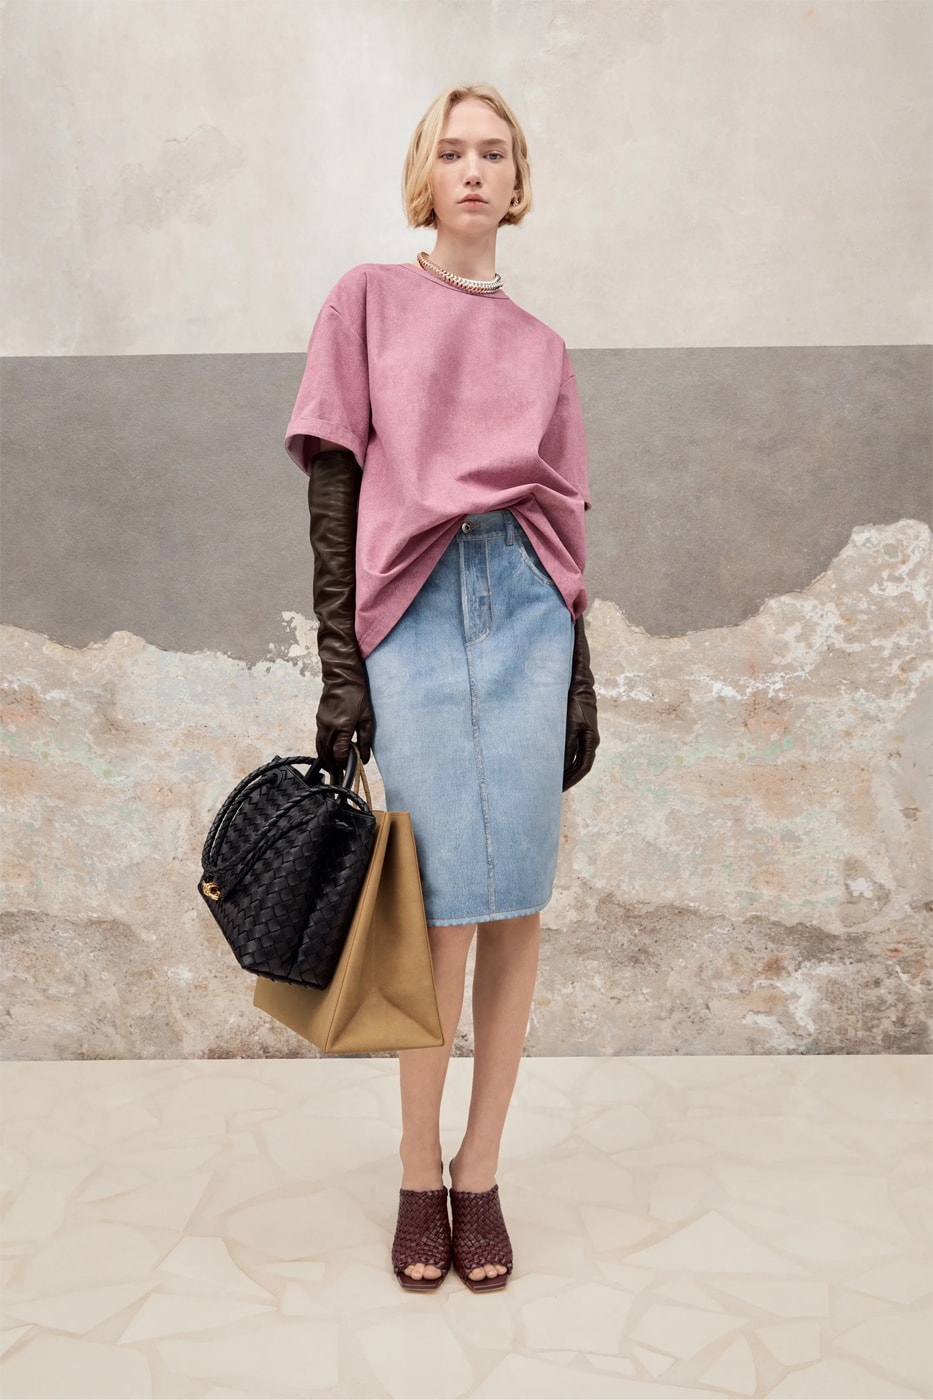 Milan Fashion Week: Bottega Veneta's ingenious trompe l'oeil for its  spring/summer 2023 collection by Matthieu Blazy, with leather pants  mimicking jeans, shredded skirts and Kate Moss on the runway